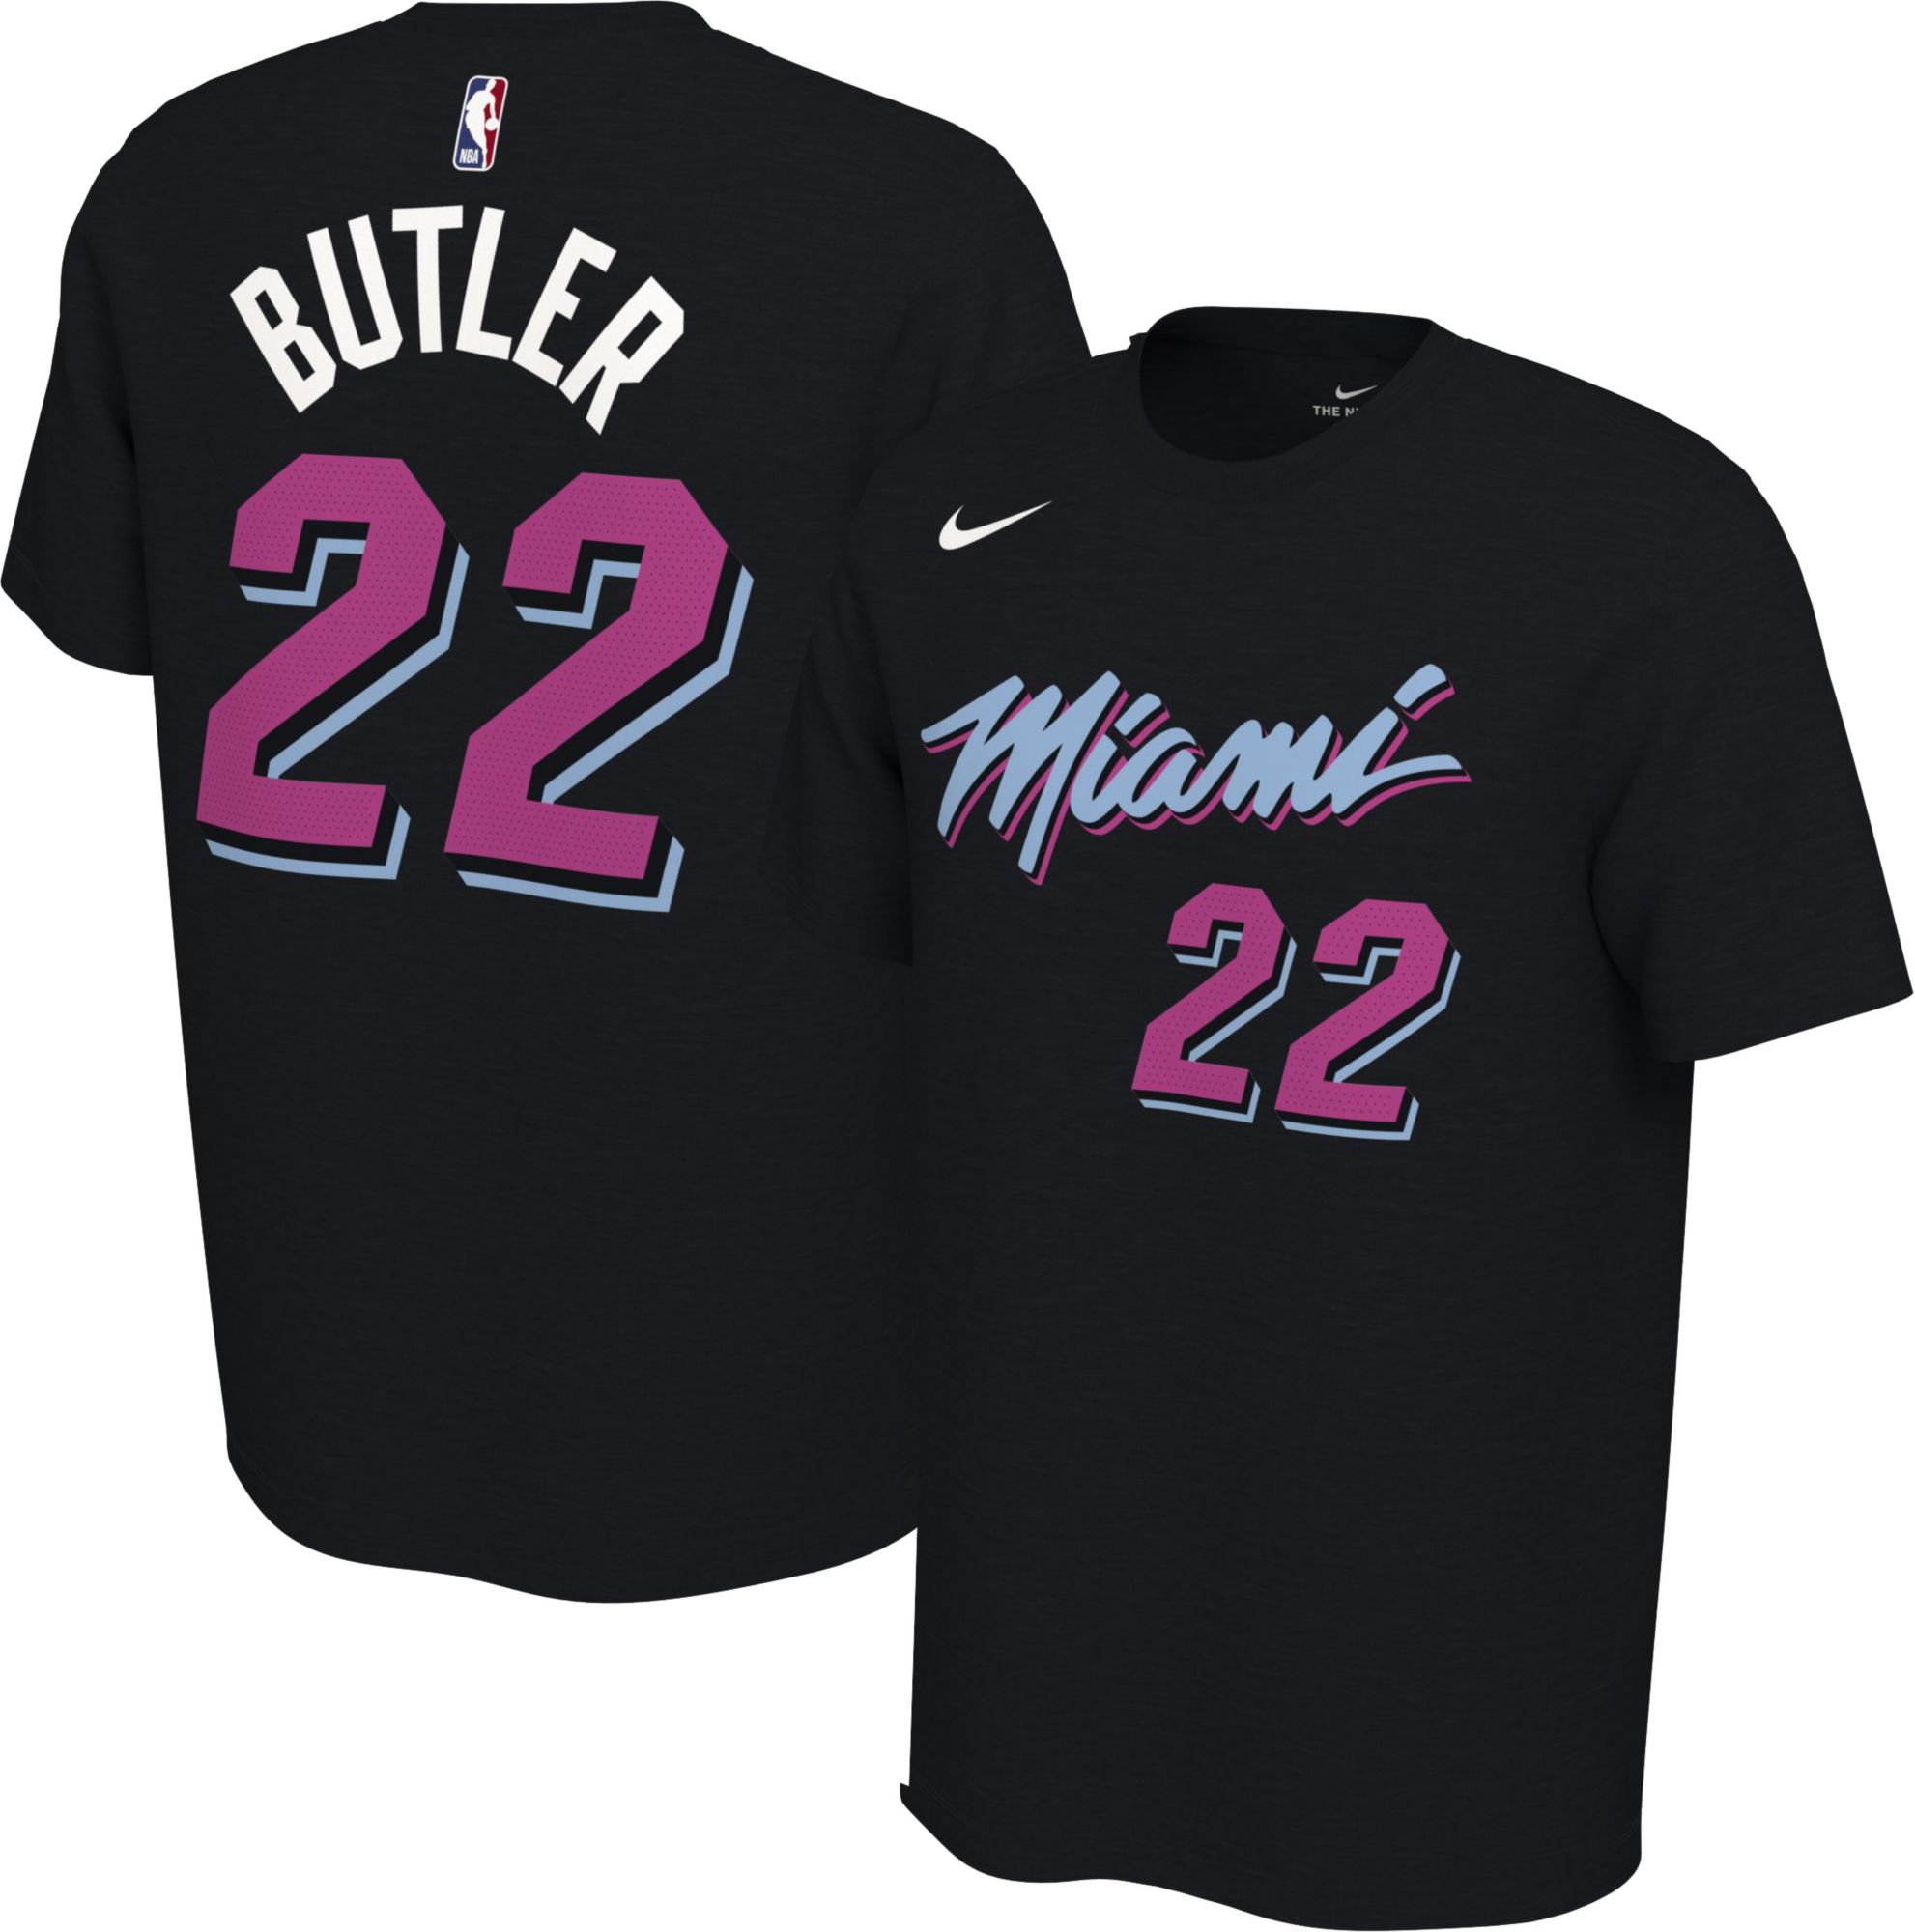 miami vice jimmy butler jersey